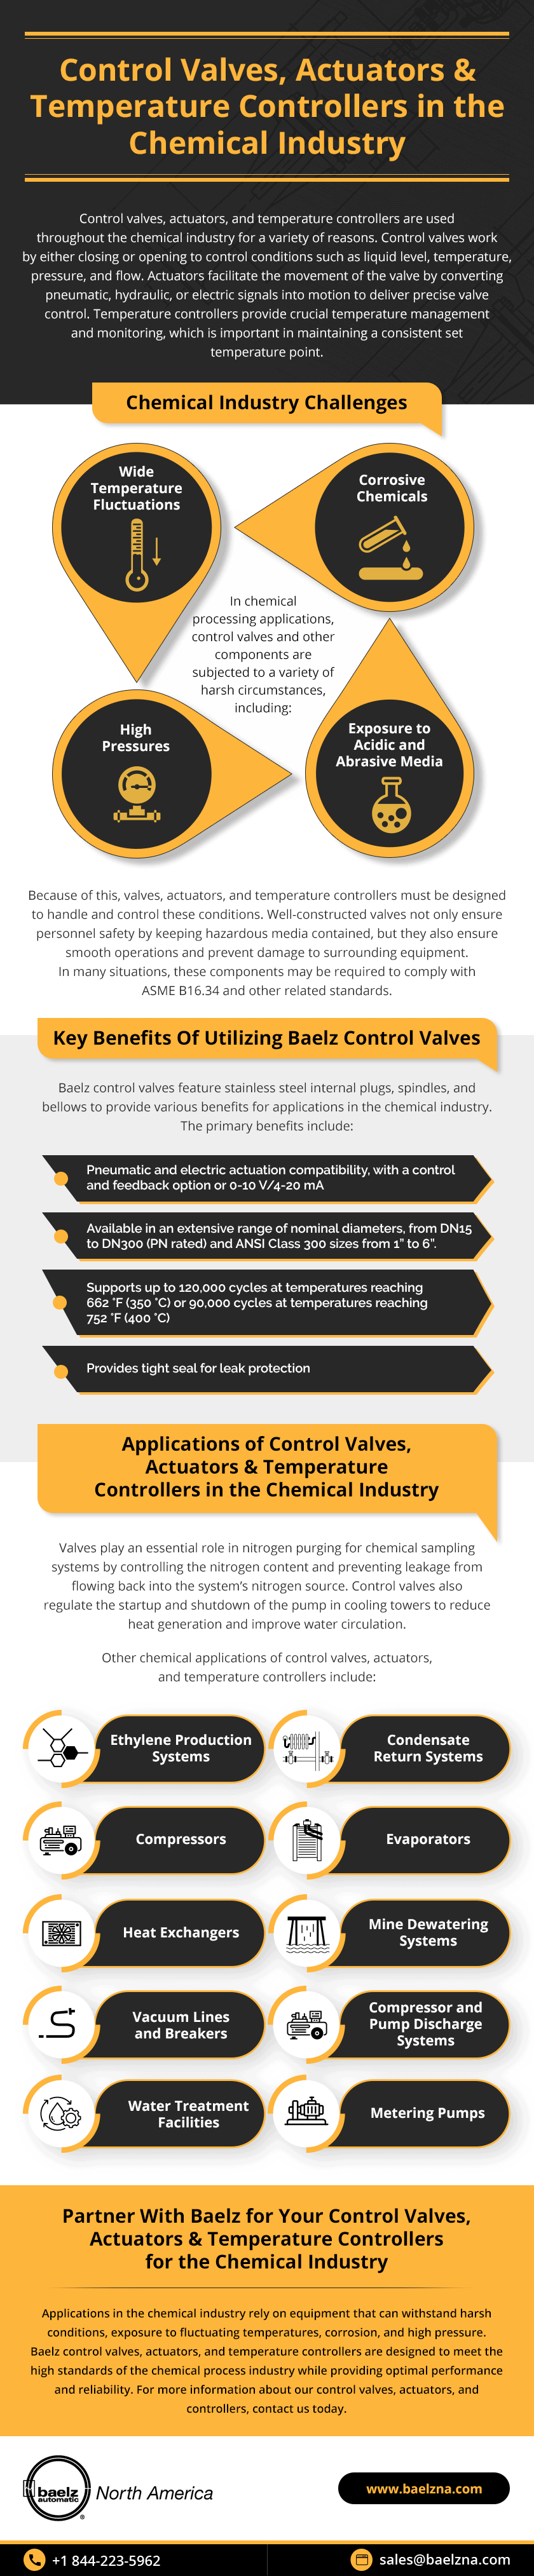 Control Valves, Actuators & Temperature Controllers in the Chemical Industry